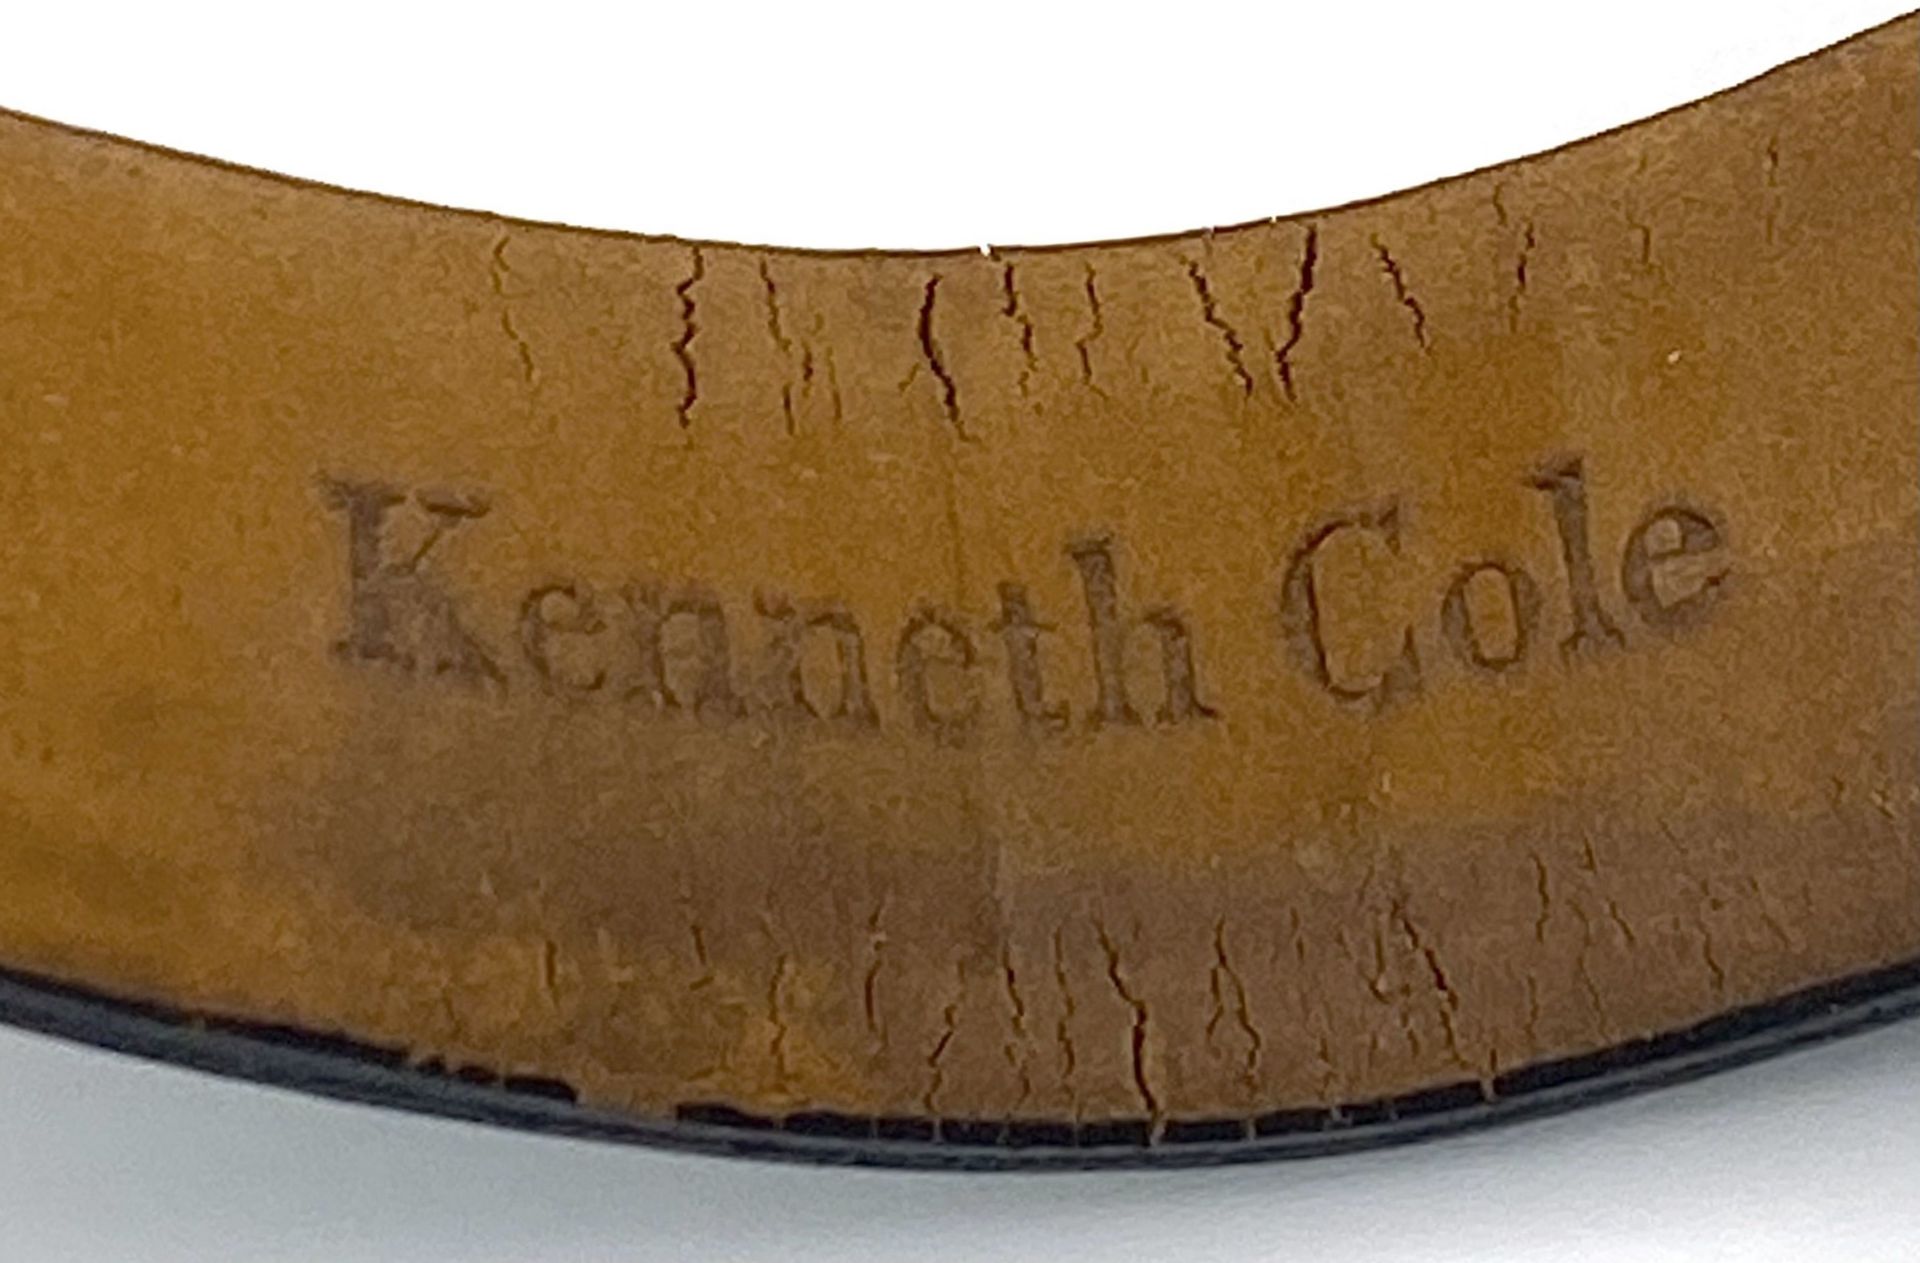 A Kenneth Cole New York Tank Style Quartz Date Watch. 26mm Case. Full Working Order. Comes with - Image 9 of 9